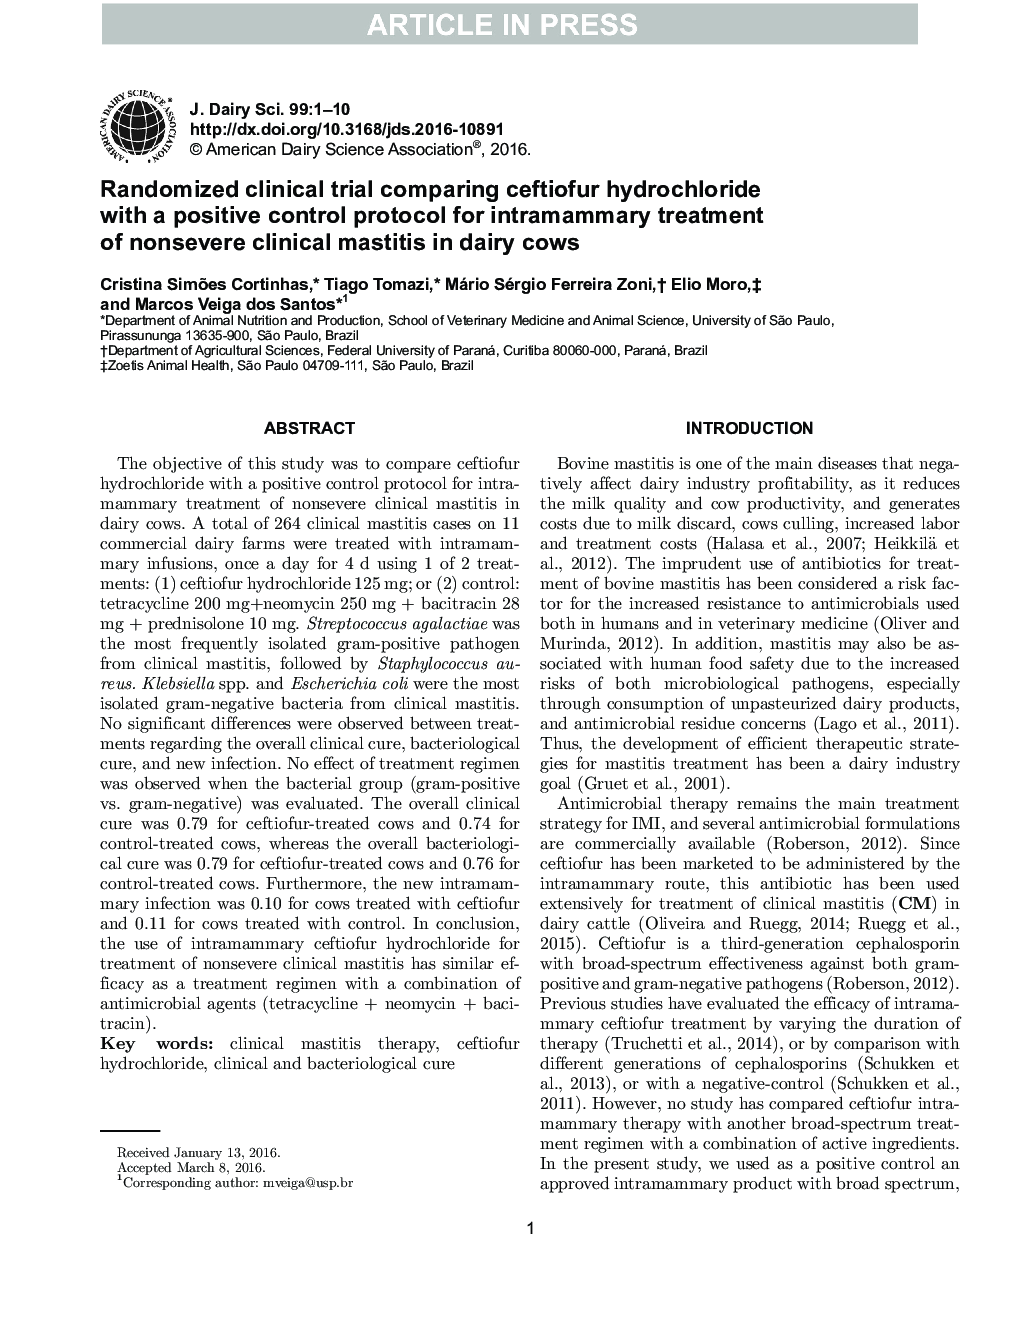 Randomized clinical trial comparing ceftiofur hydrochloride with a positive control protocol for intramammary treatment of nonsevere clinical mastitis in dairy cows